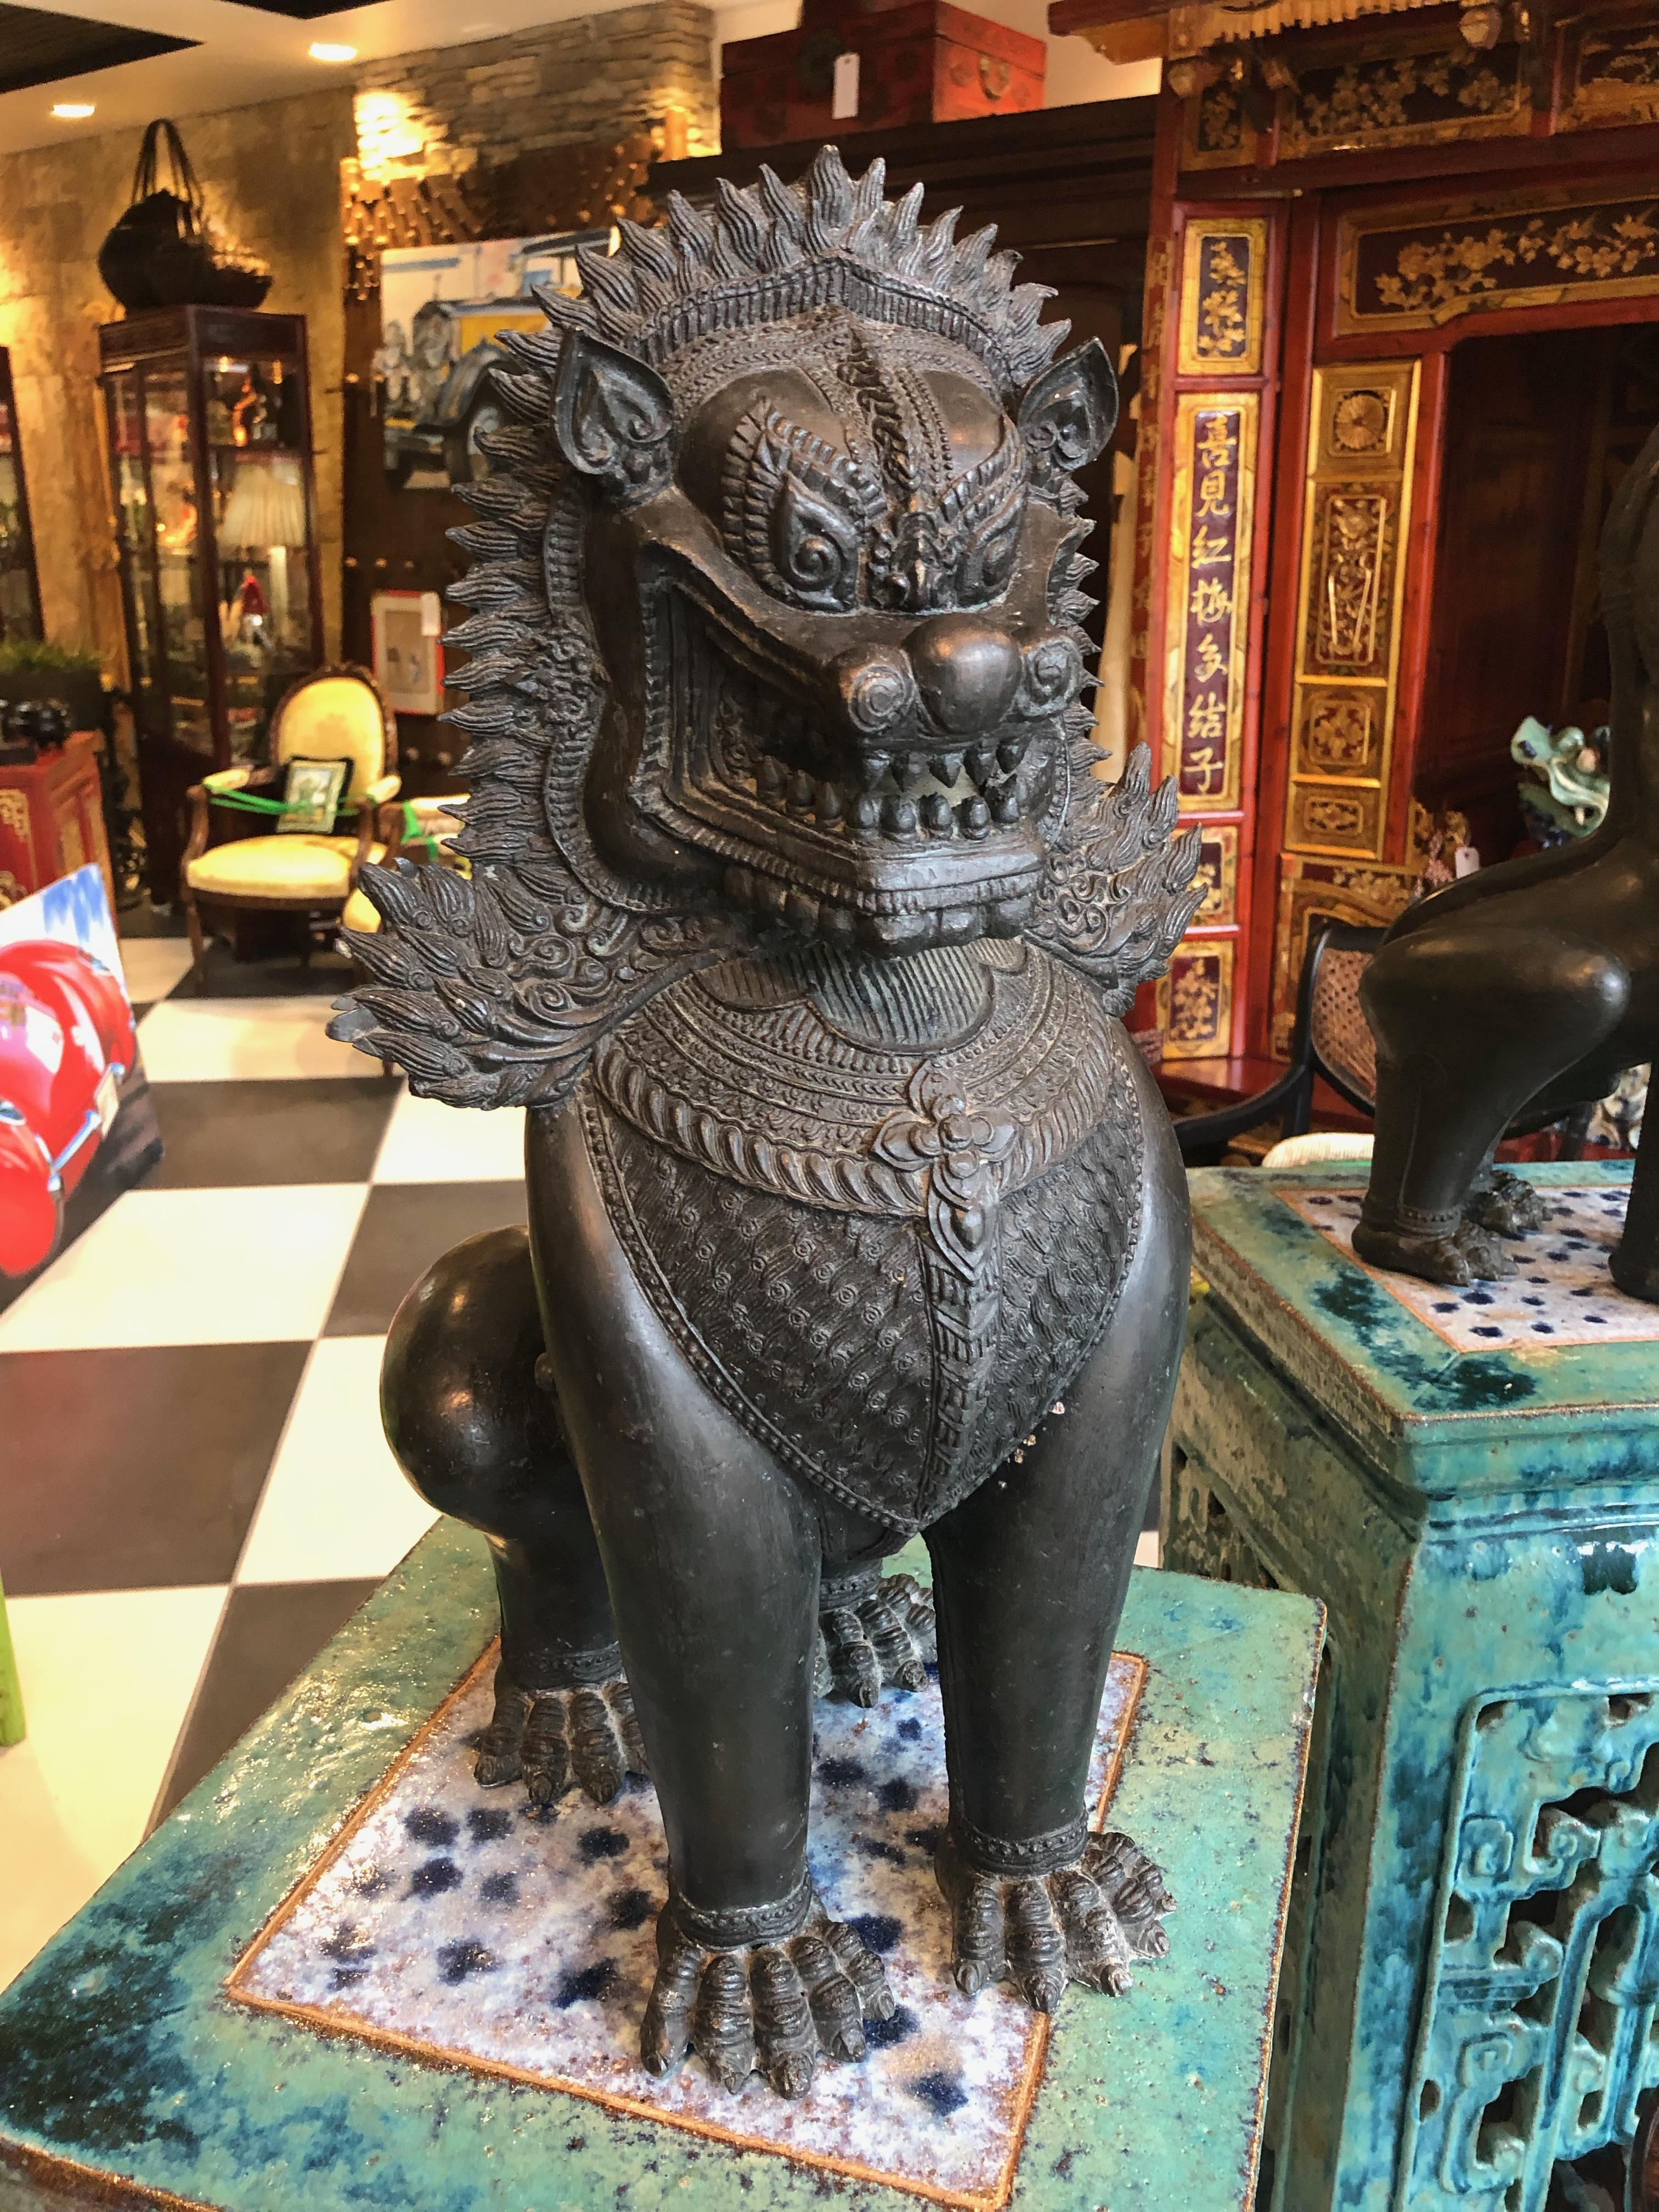 These Foo dogs are bronze statues from Thailand fierce Mythical lions ornamental in jewelry across their chests, baring their teeth to scare away bad spirits and bad luck. The 